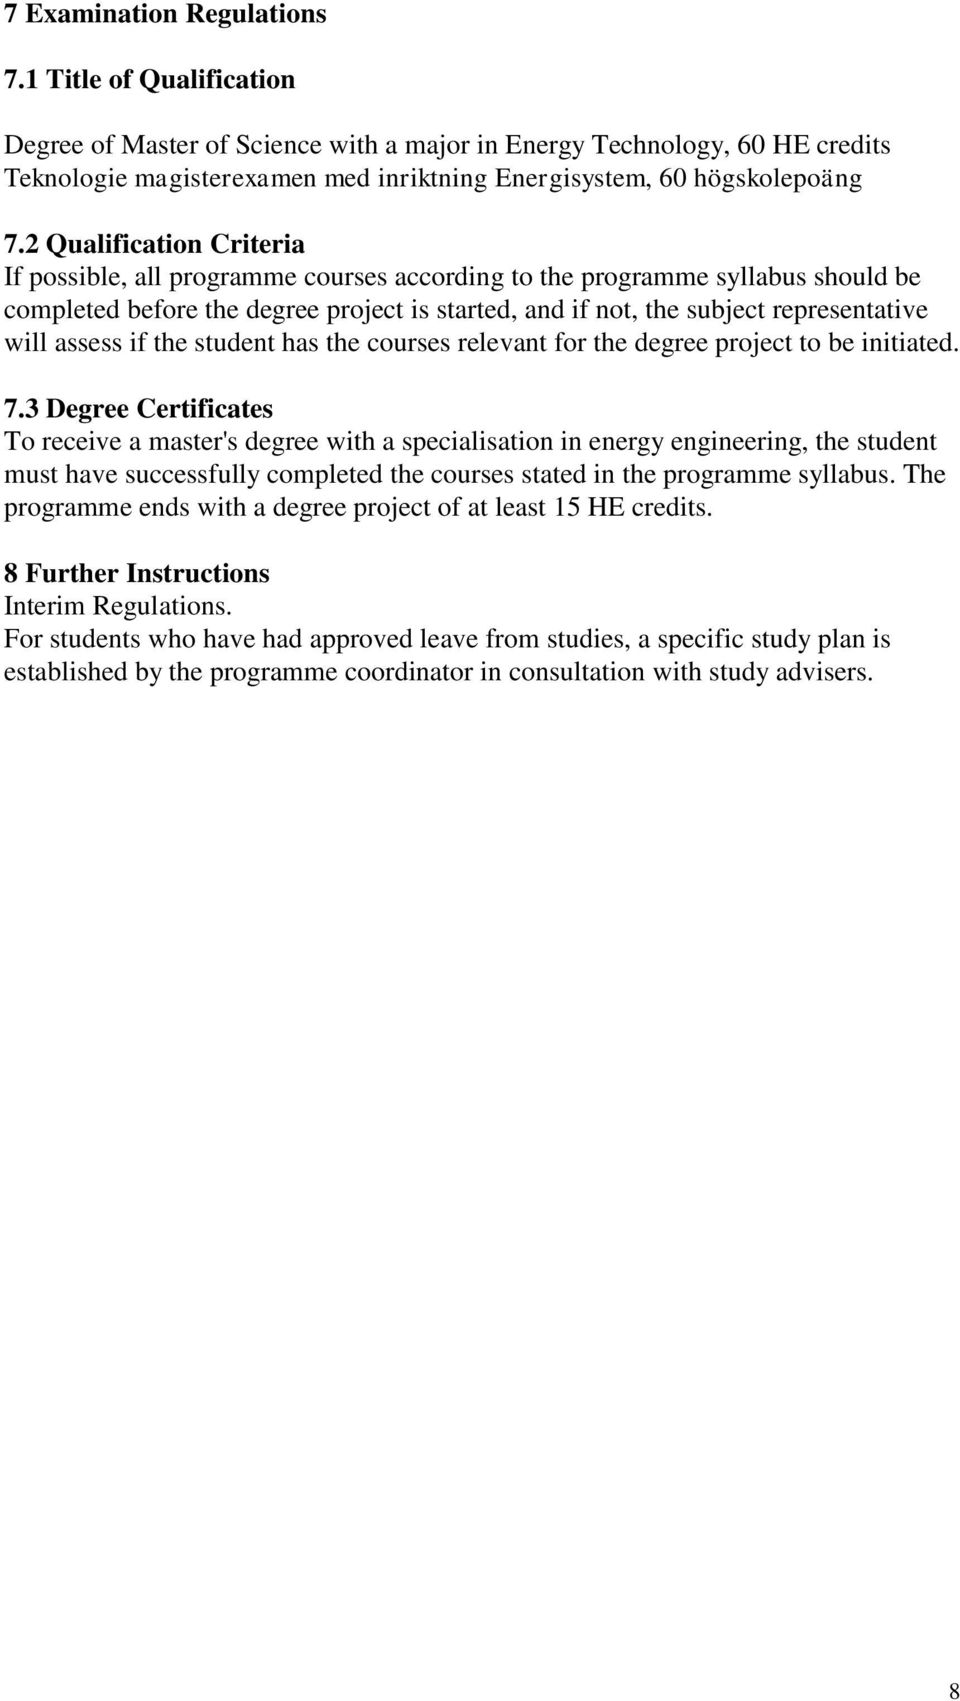 2 Qualification Criteria If possible, all programme courses according to the programme syllabus should be completed before the degree project is started, and if not, the subject representative will